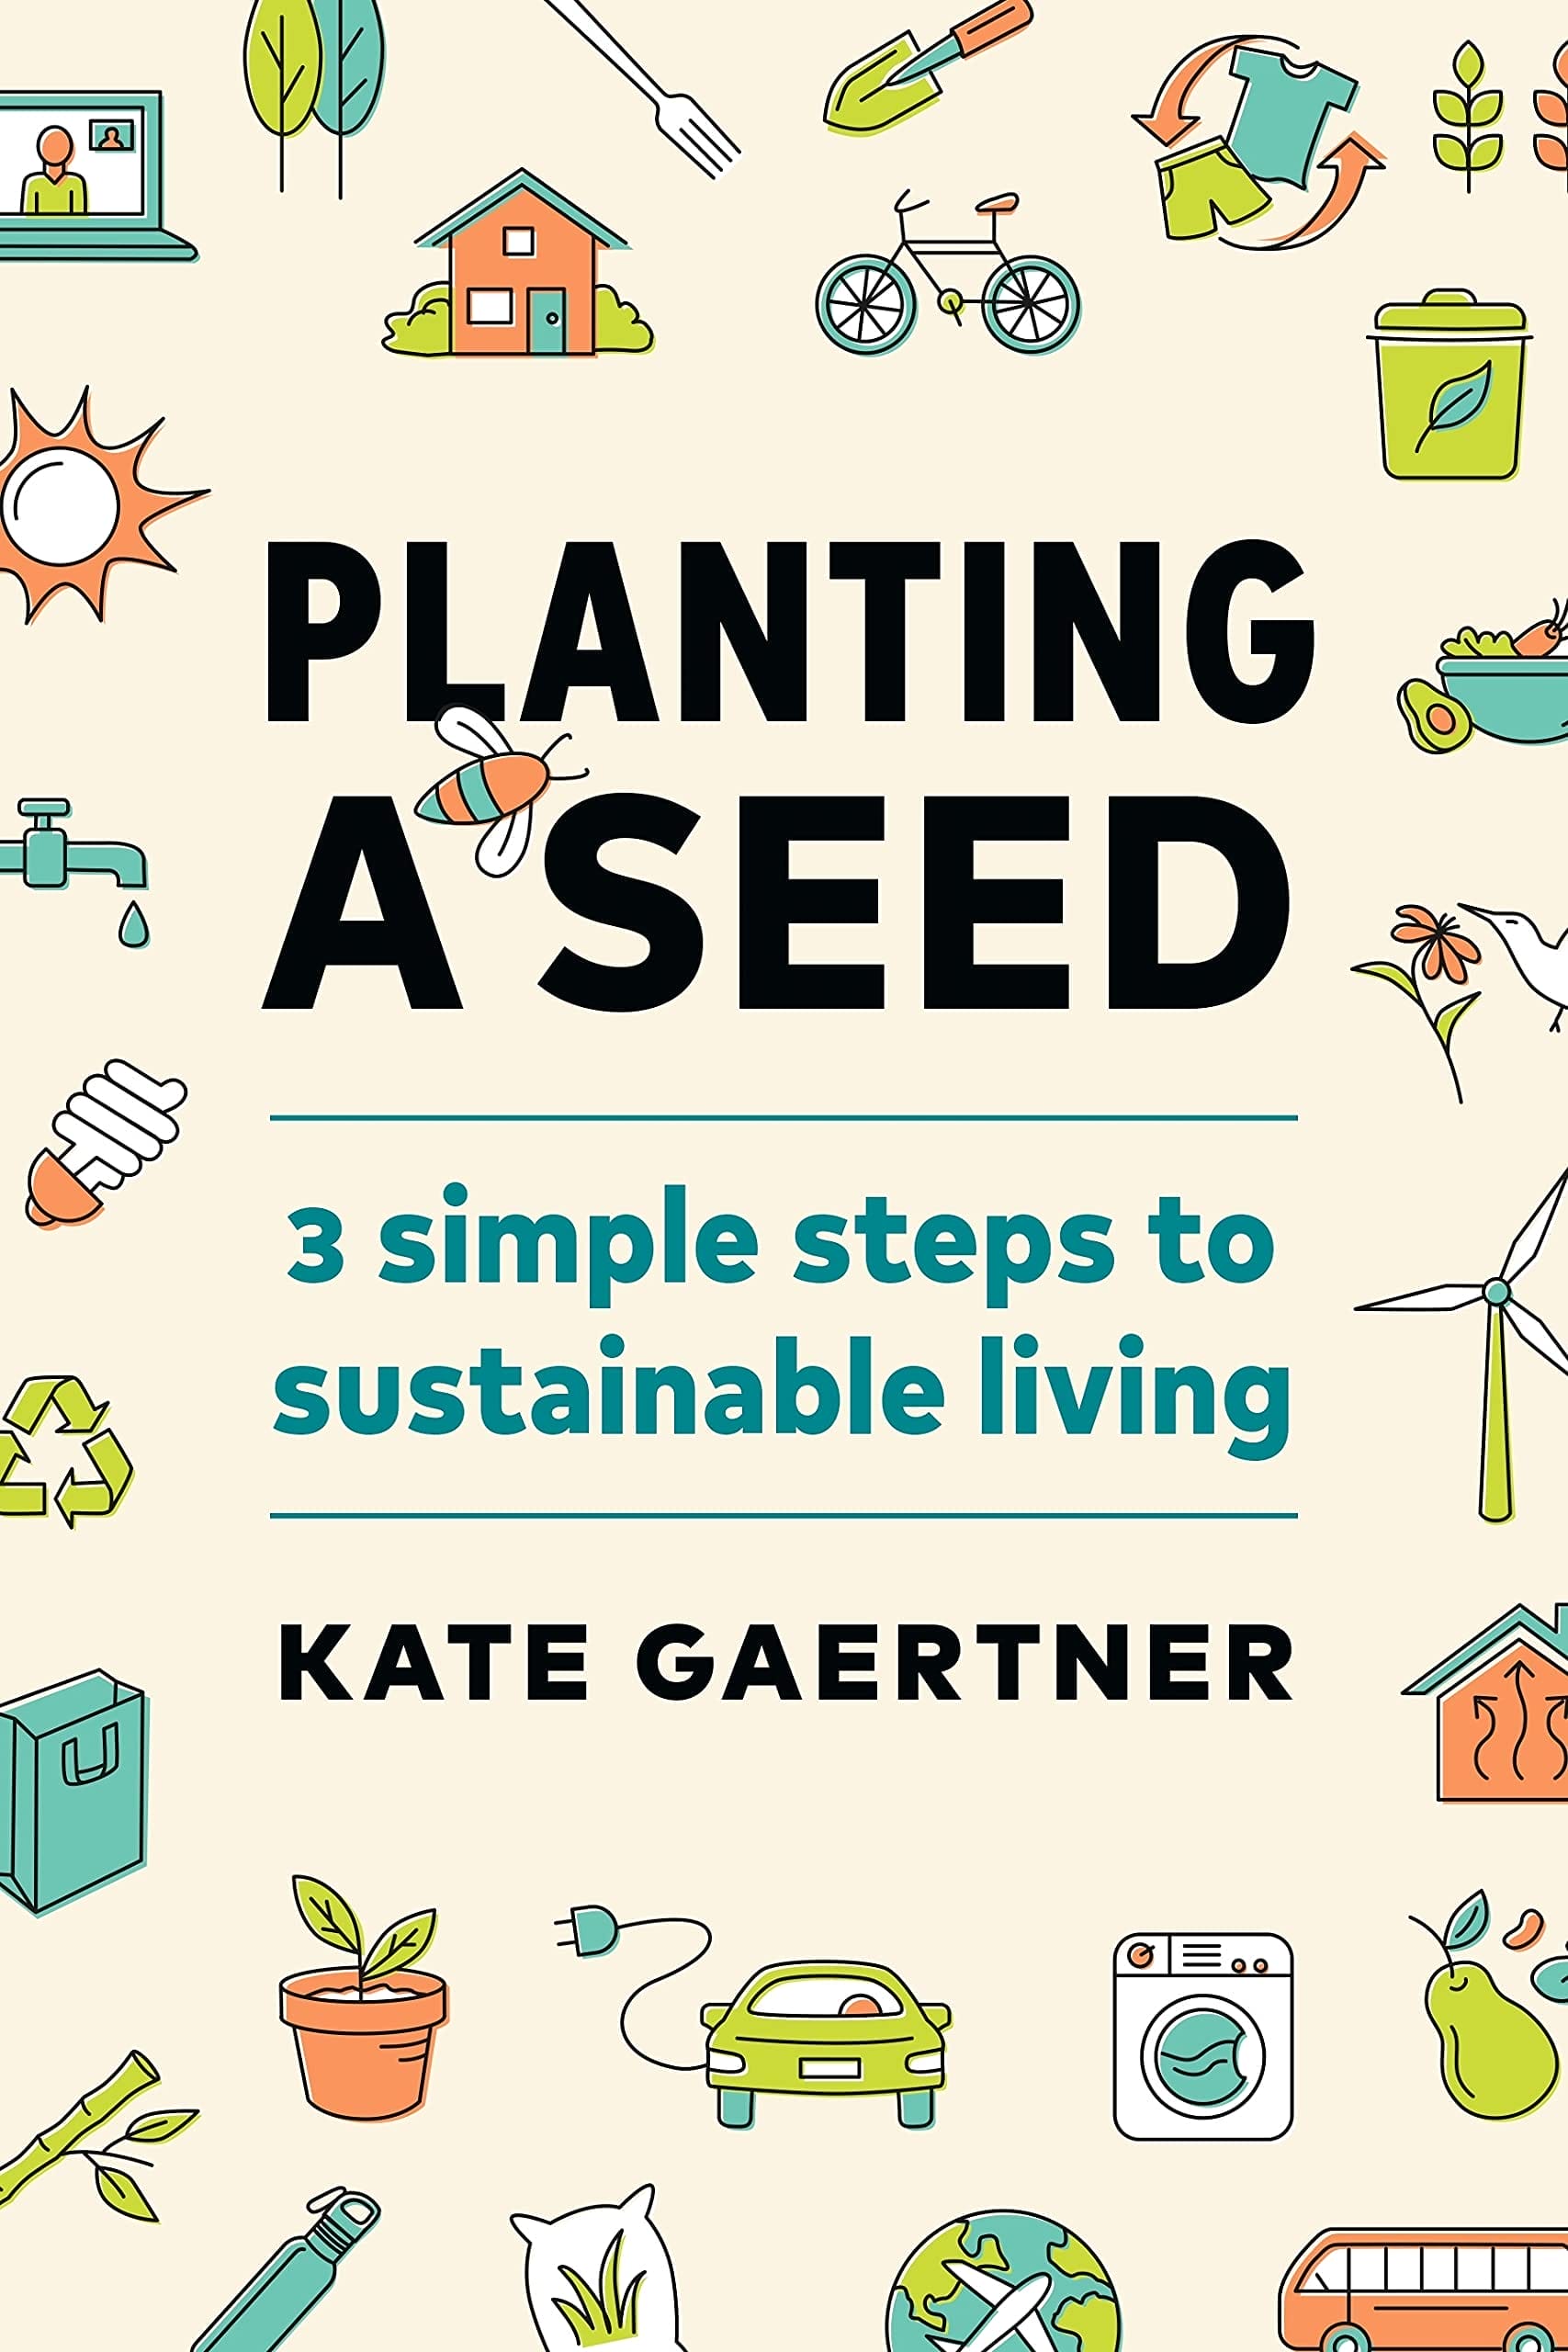 Book cover for "Planting a Seed"